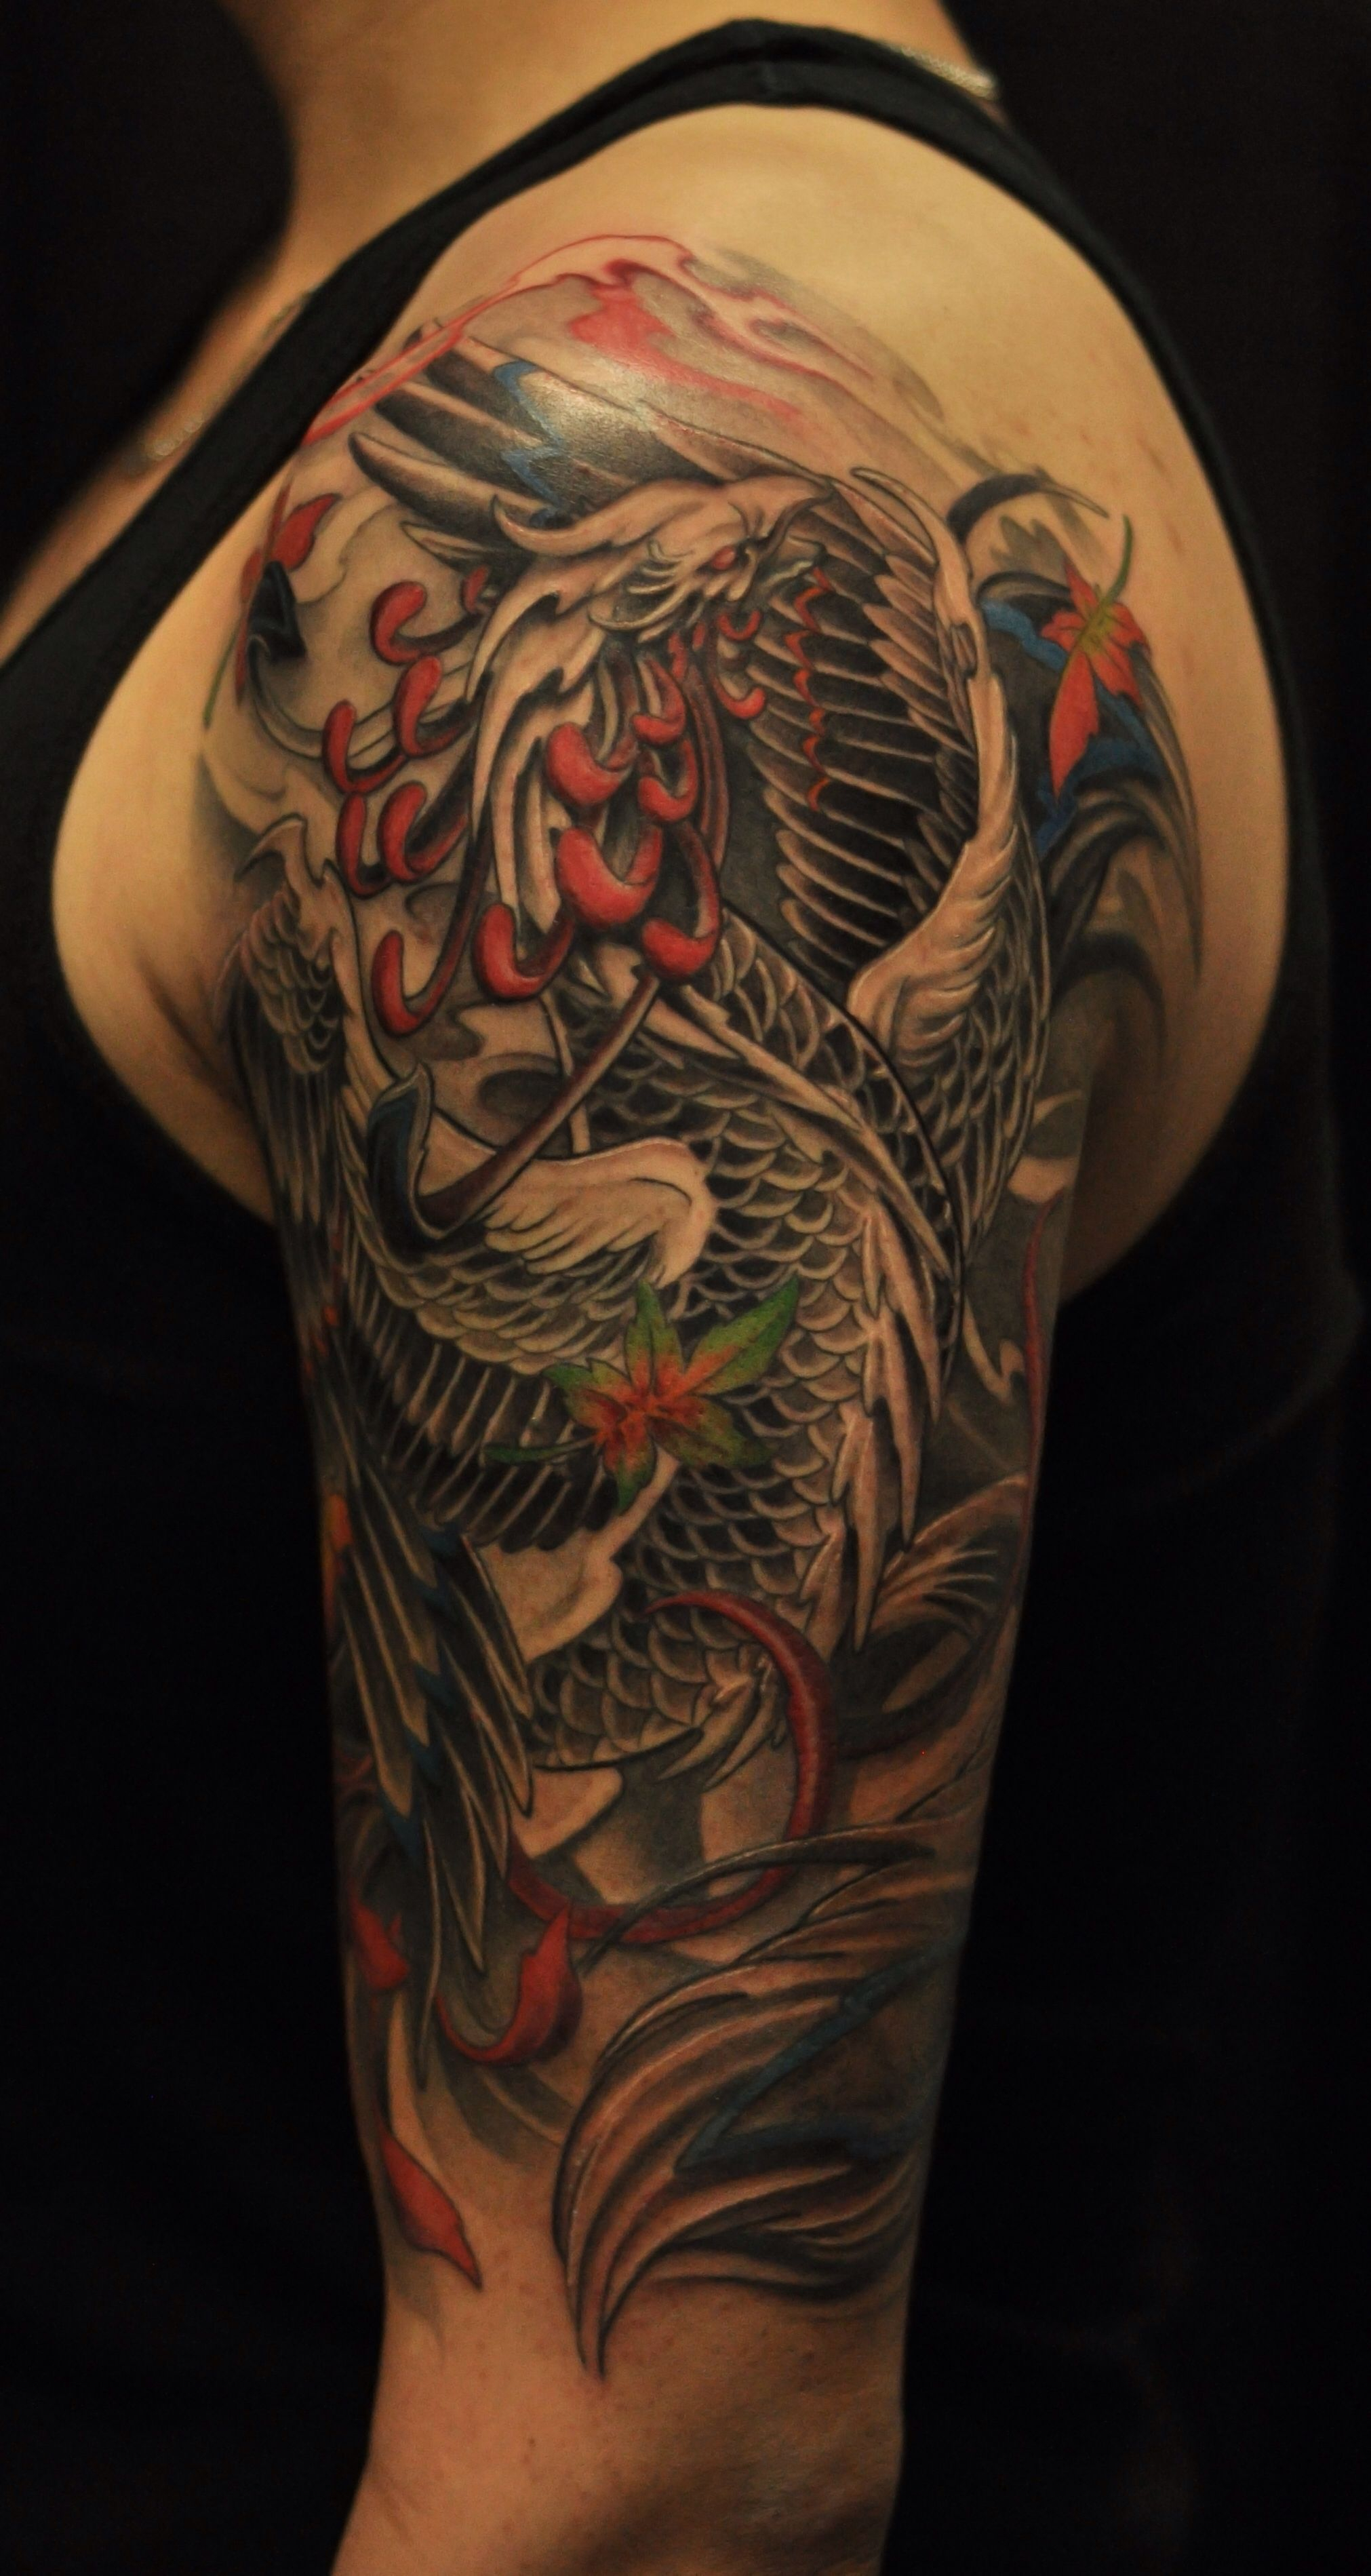 This Is One Of The Coolest Phoenix Tattoos Ive Seen Tattoo intended for size 2022 X 3798